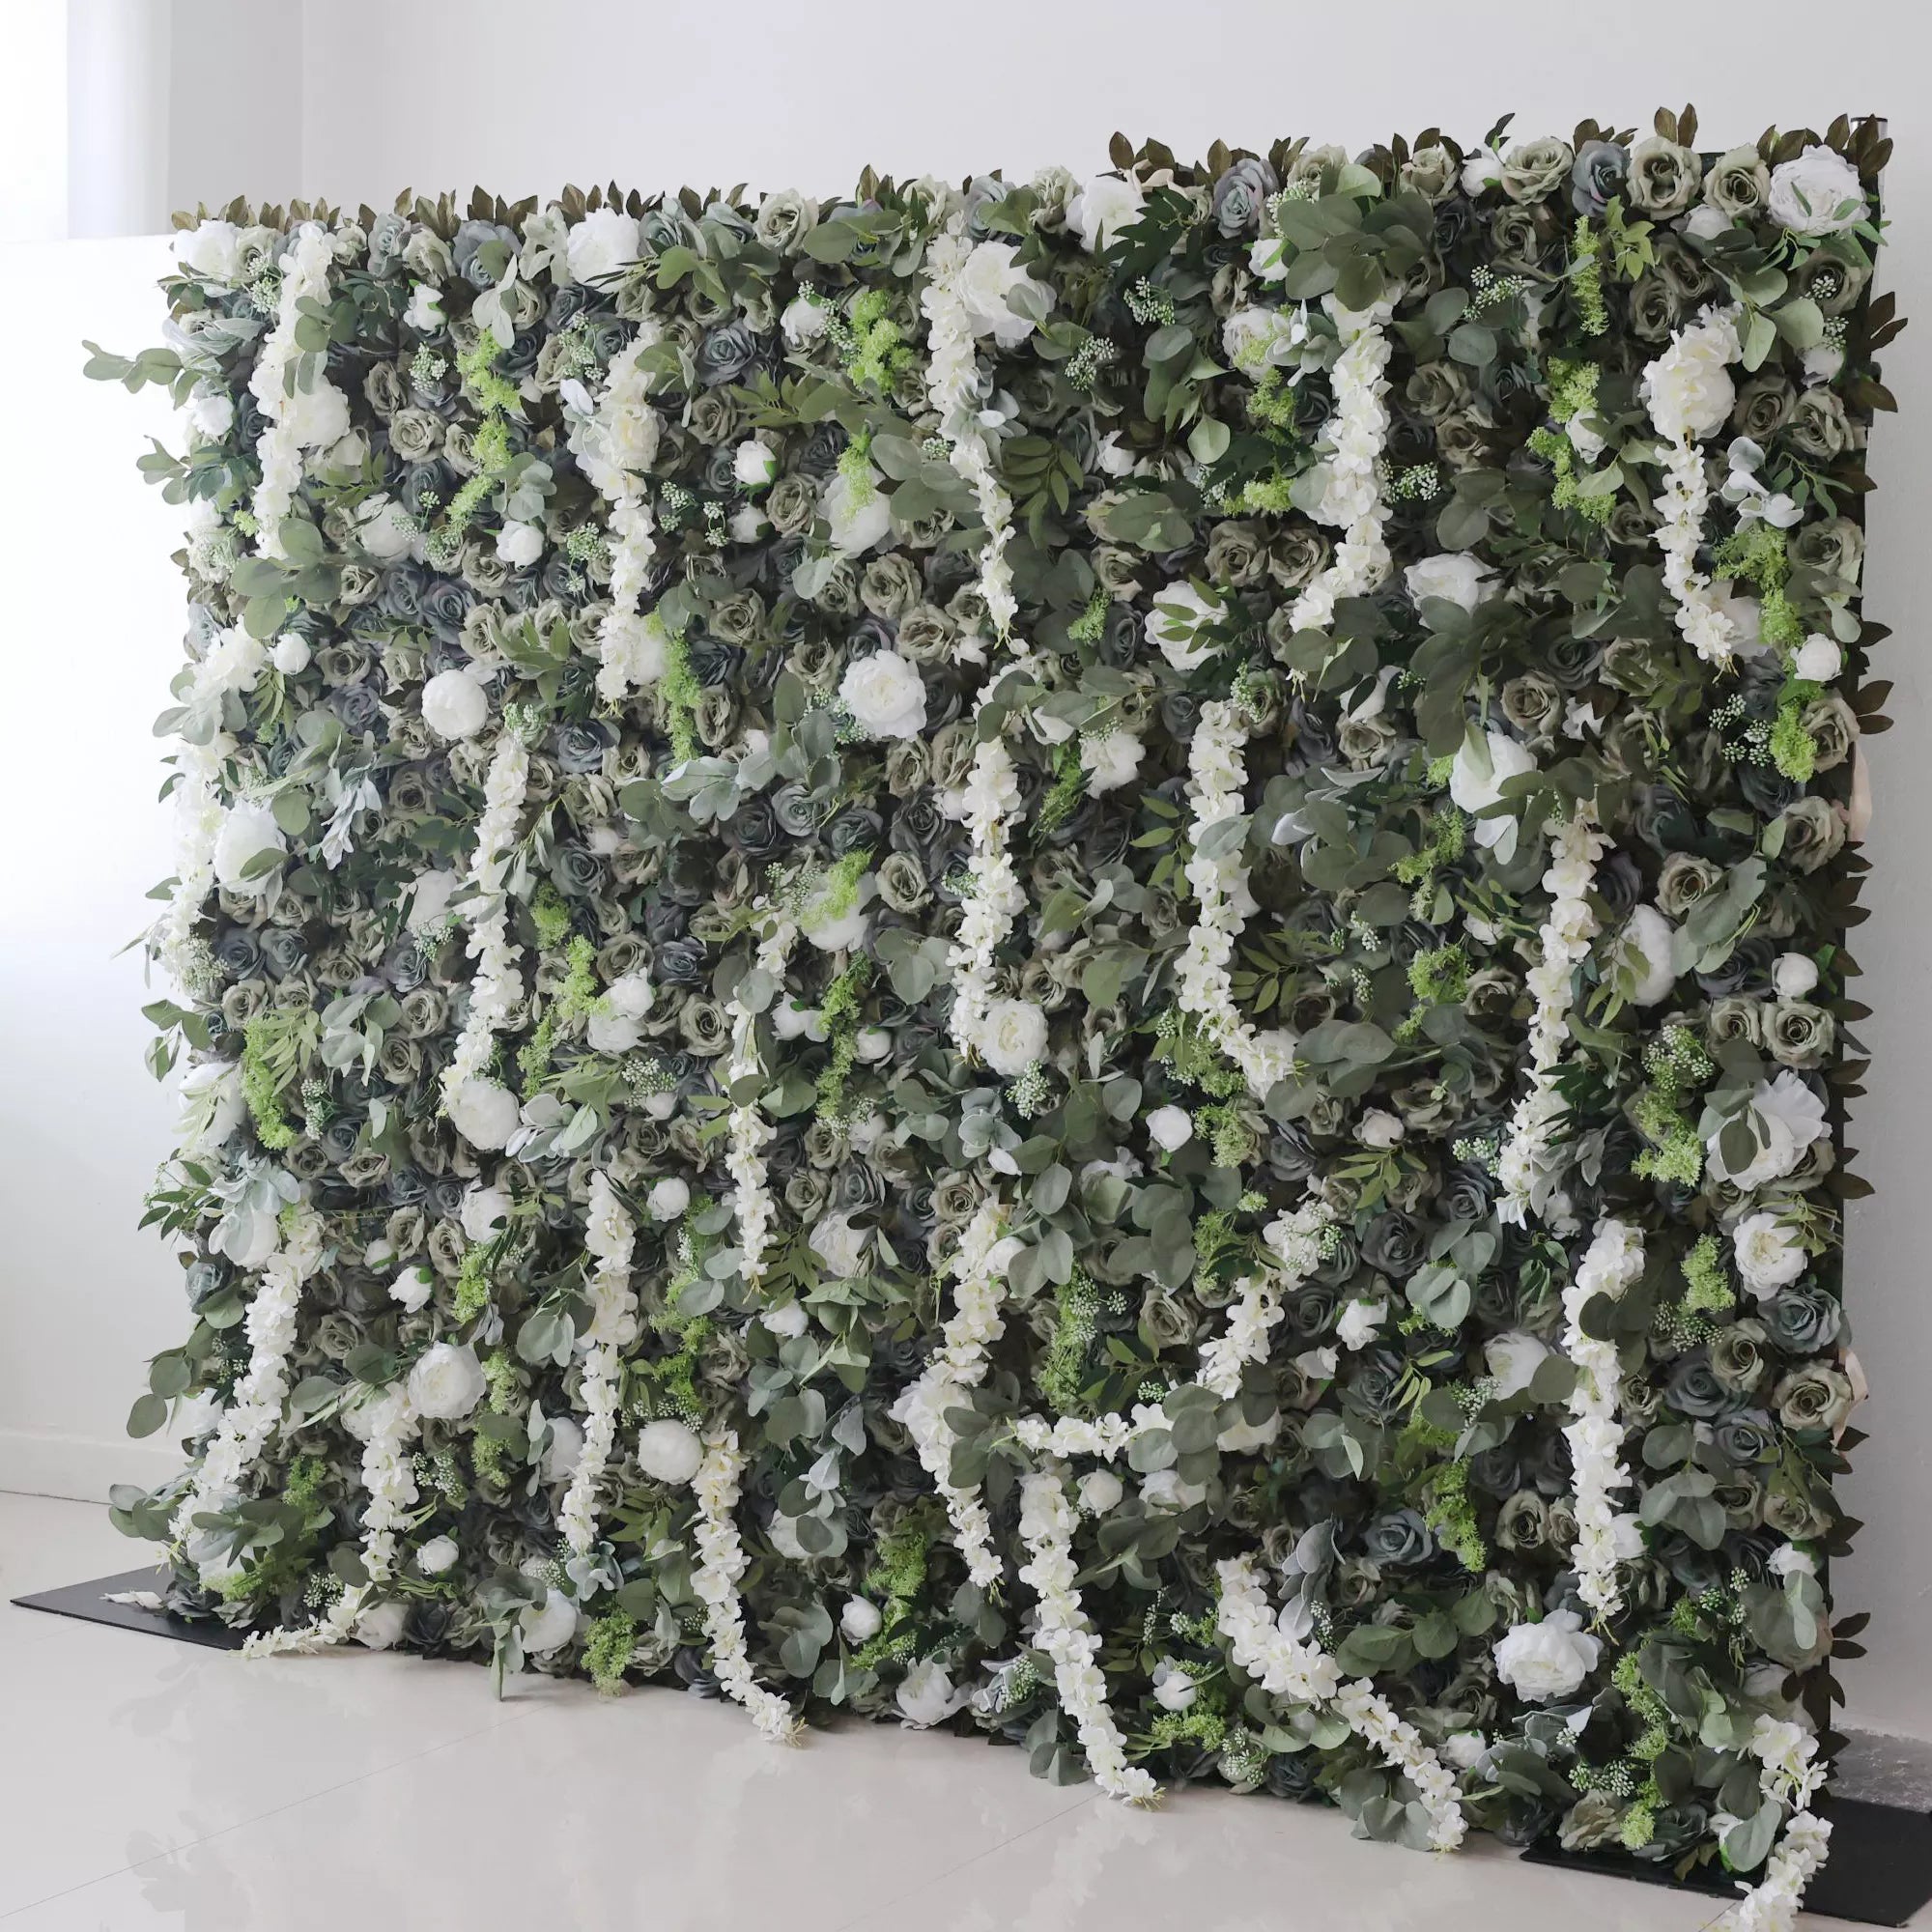 Valar Flowers' Verdant Elysium: A luxuriant blend of green foliage and cascading white blooms; perfect for an organic, eco-luxe ambiance in events and interiors.